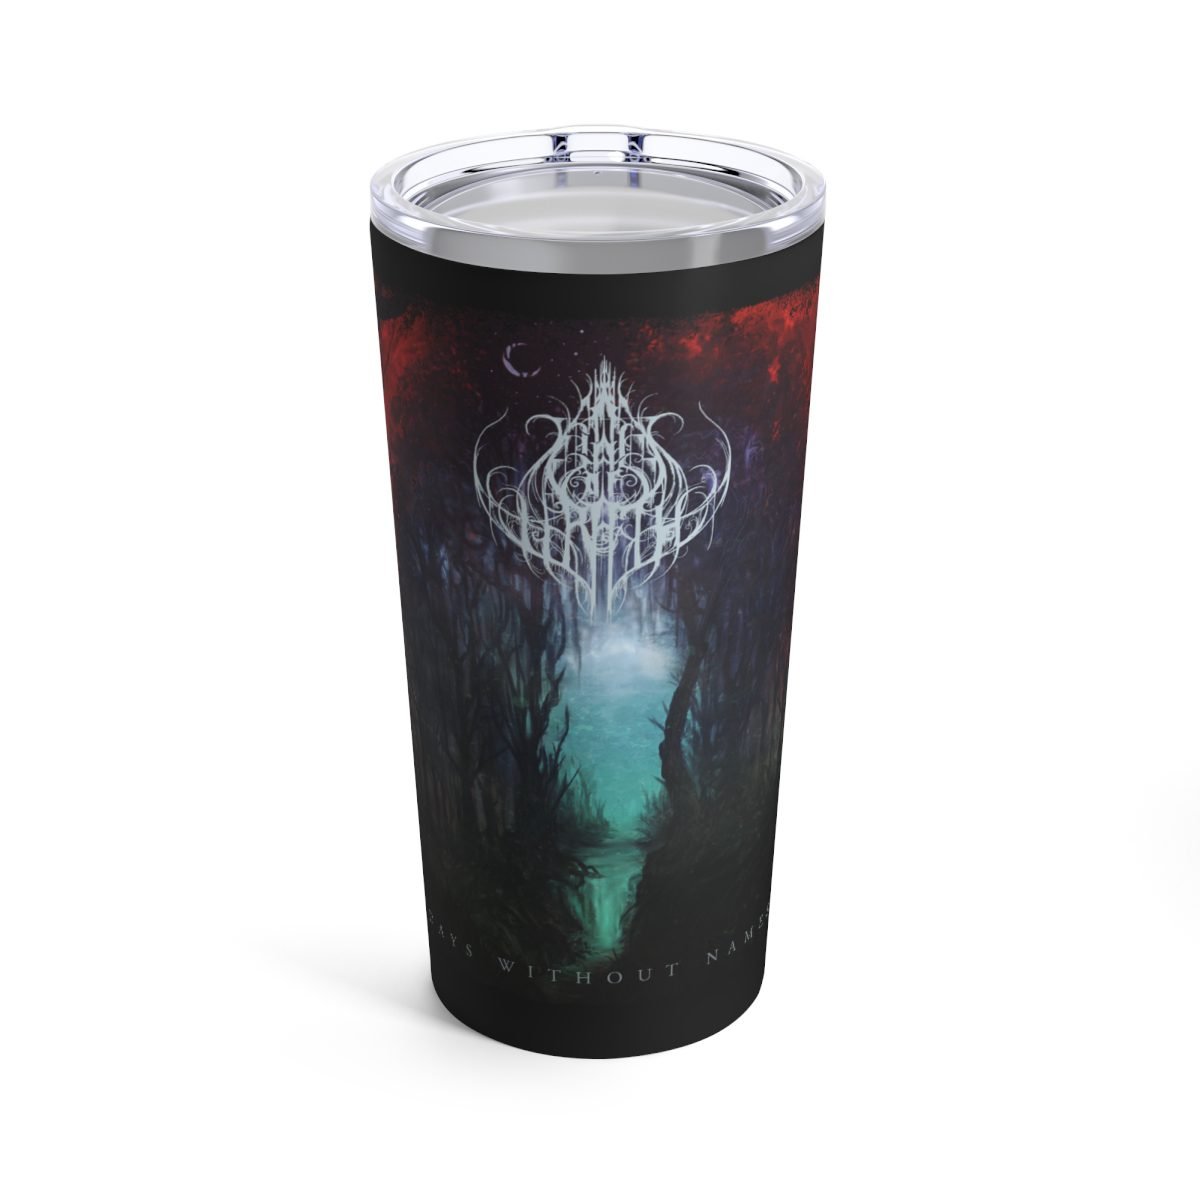 Vials of Wrath – Days Without Names 20oz Stainless Steel Tumbler